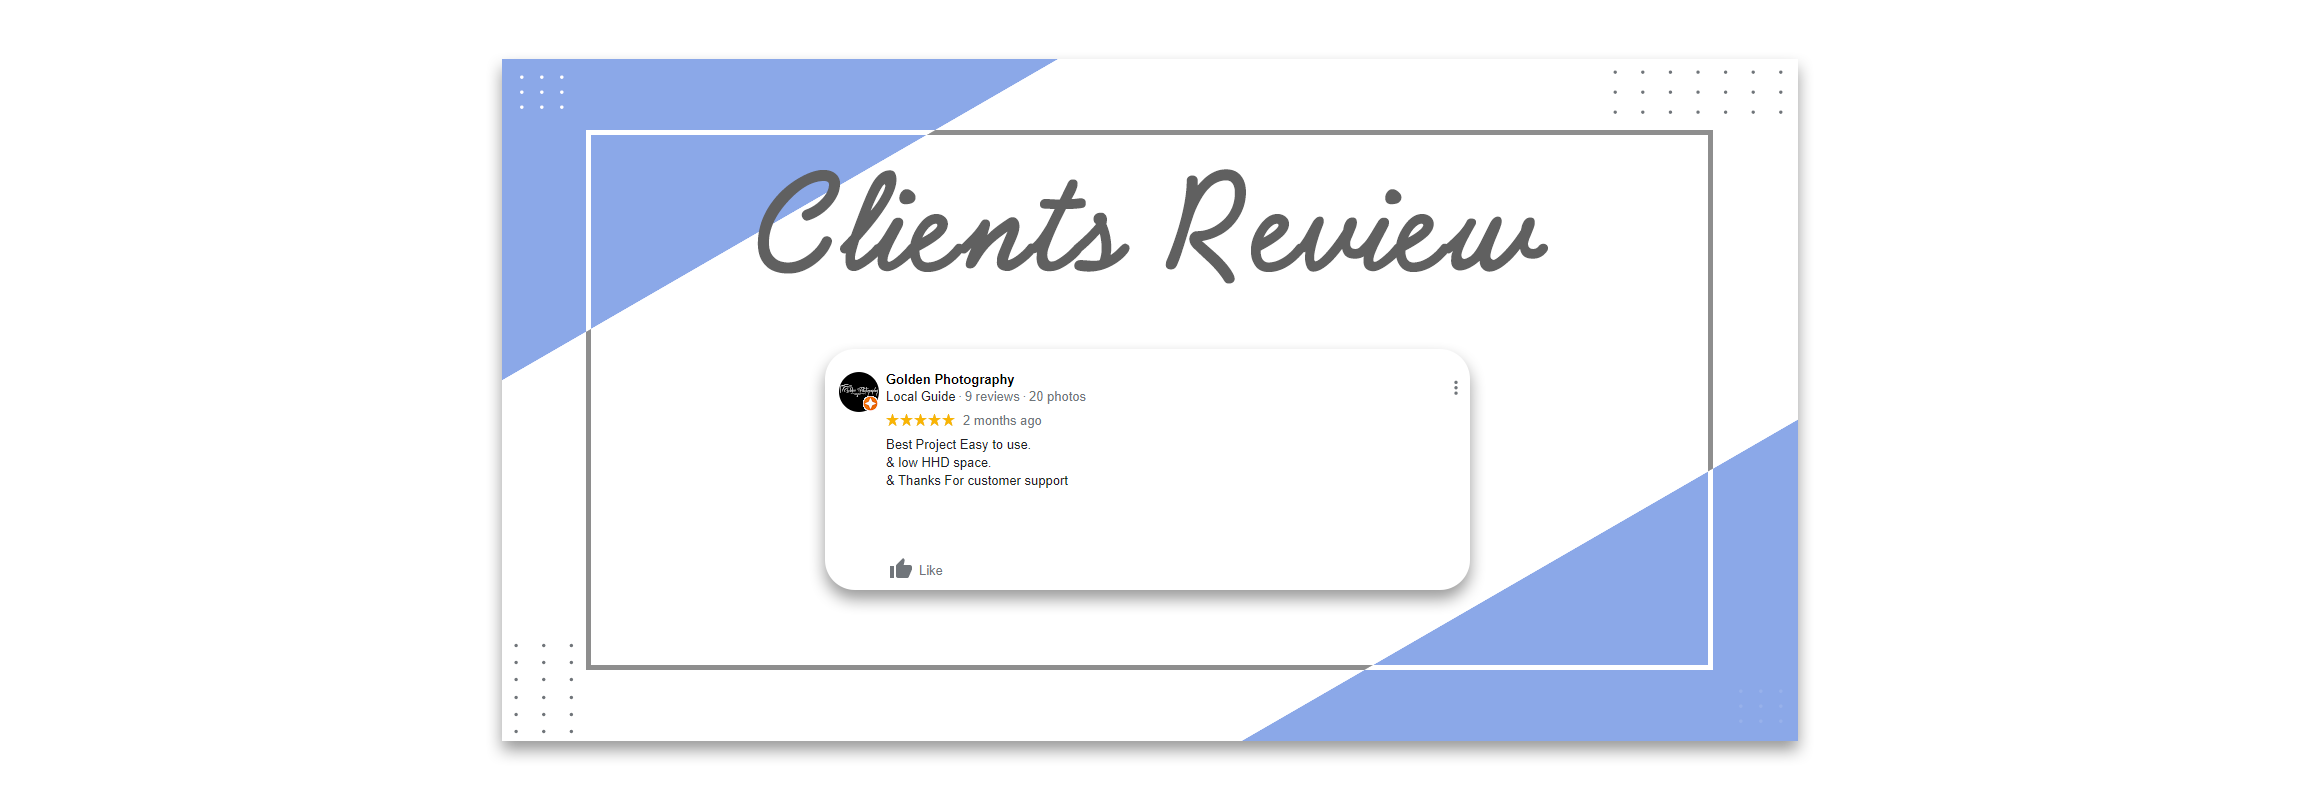 google client review img edit zone india 3